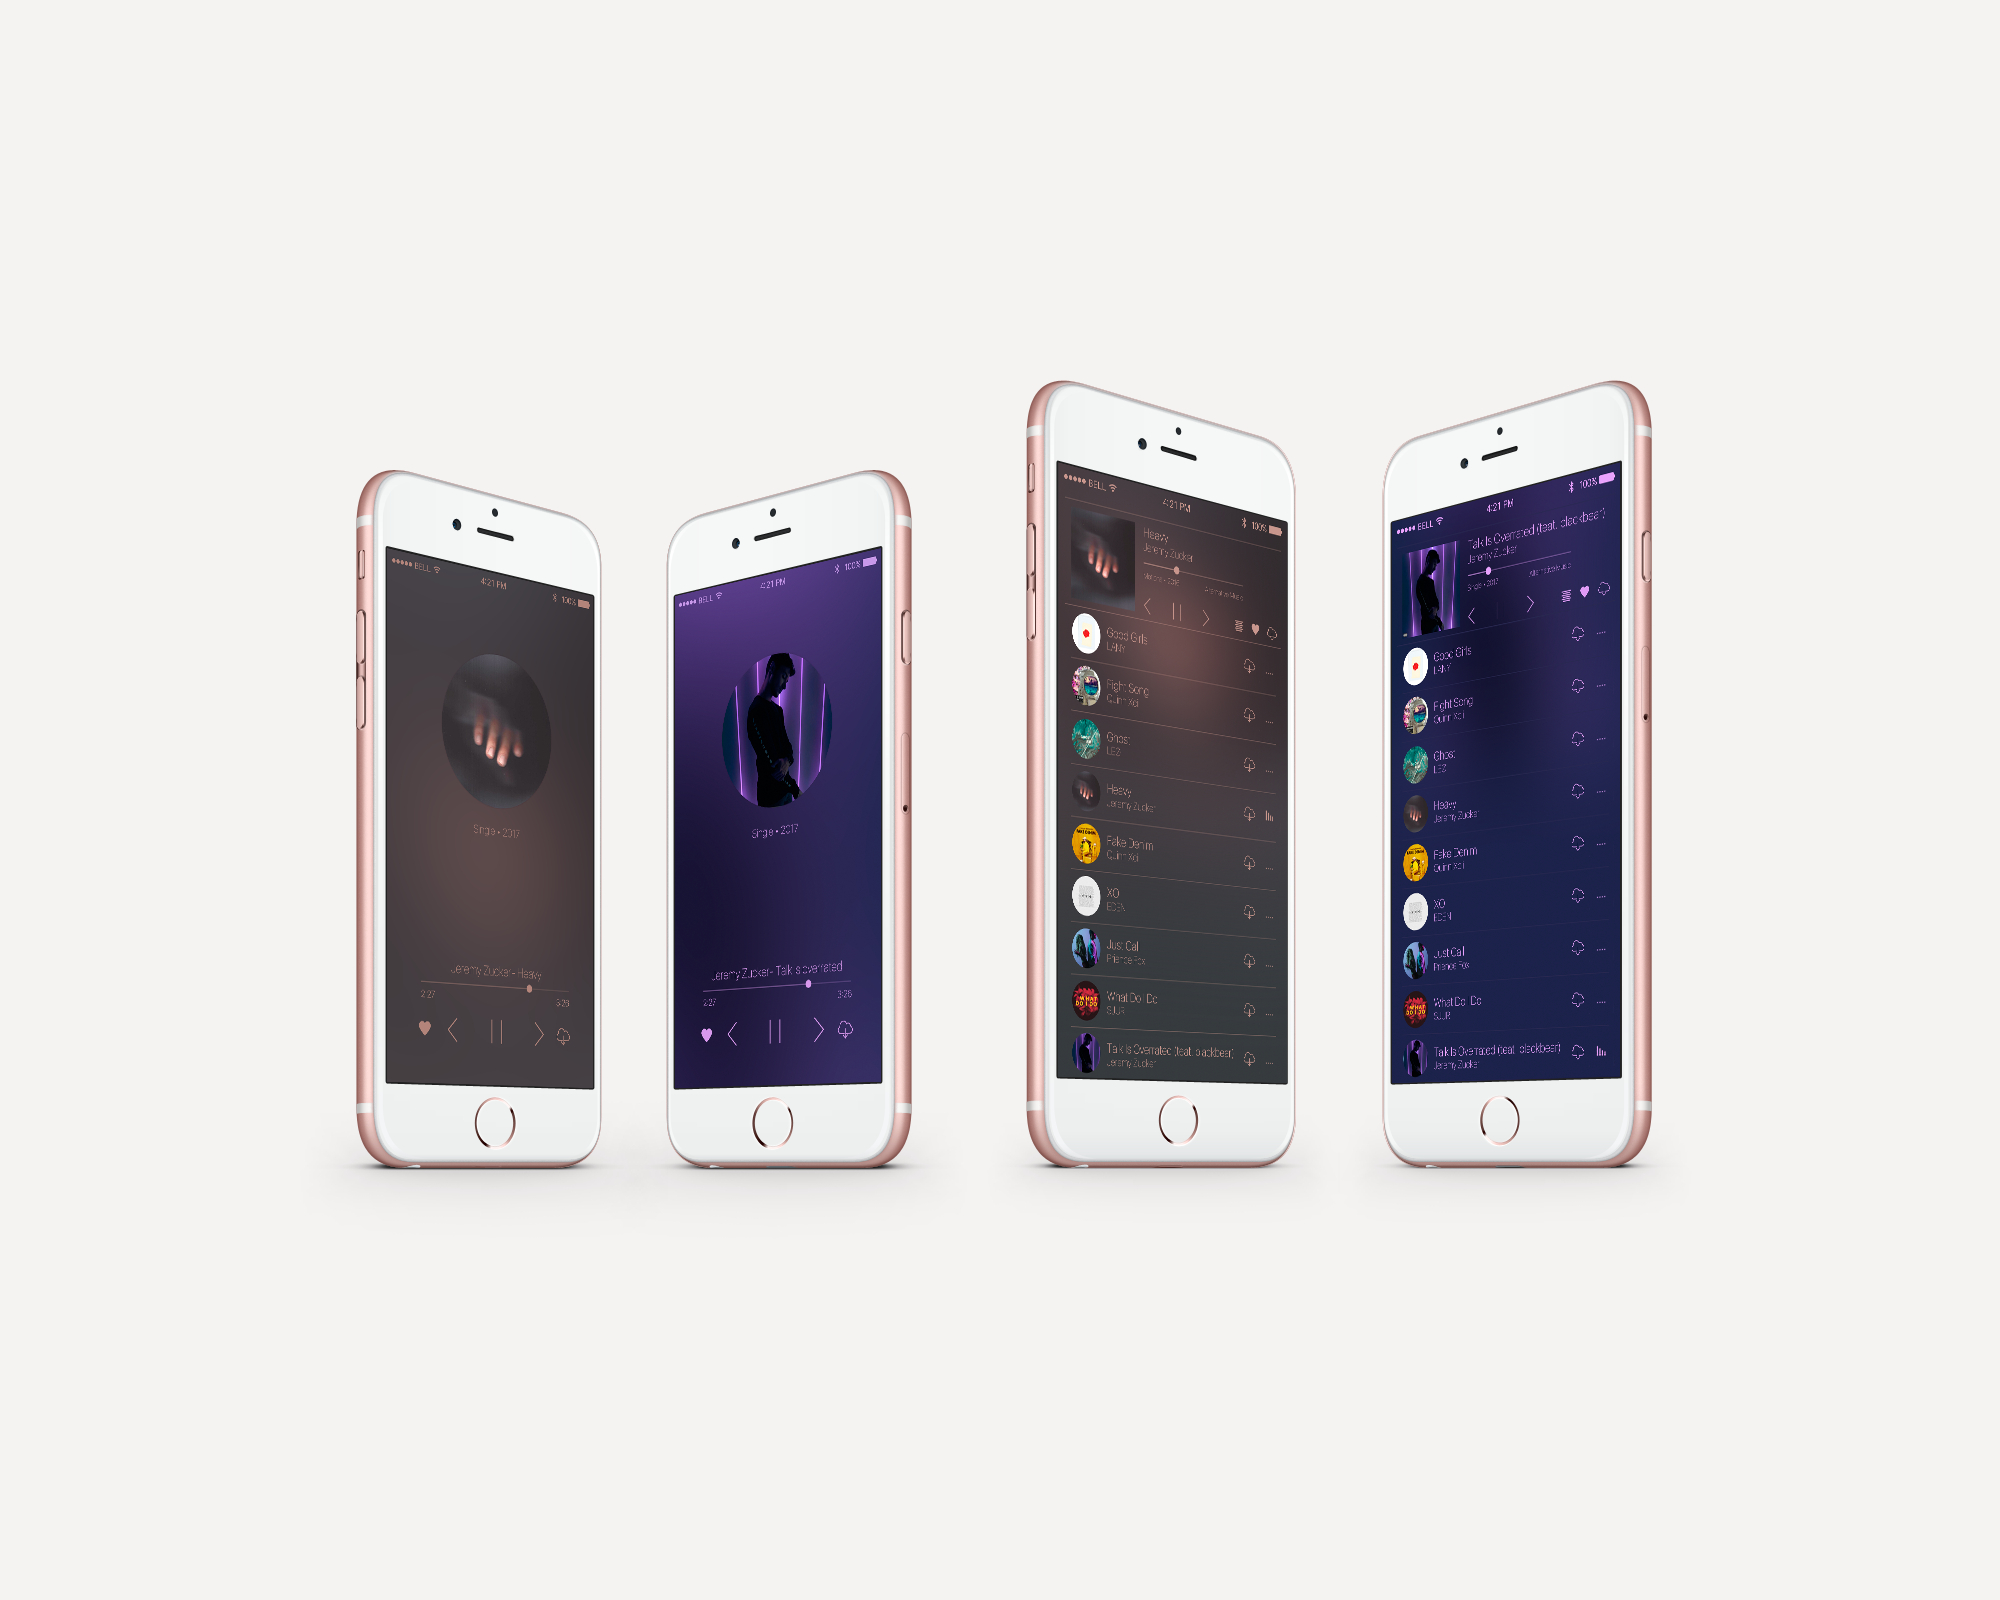 002-iPhone-6S-Rose-Gold-Trhee-quarters-view-Mockup small.png